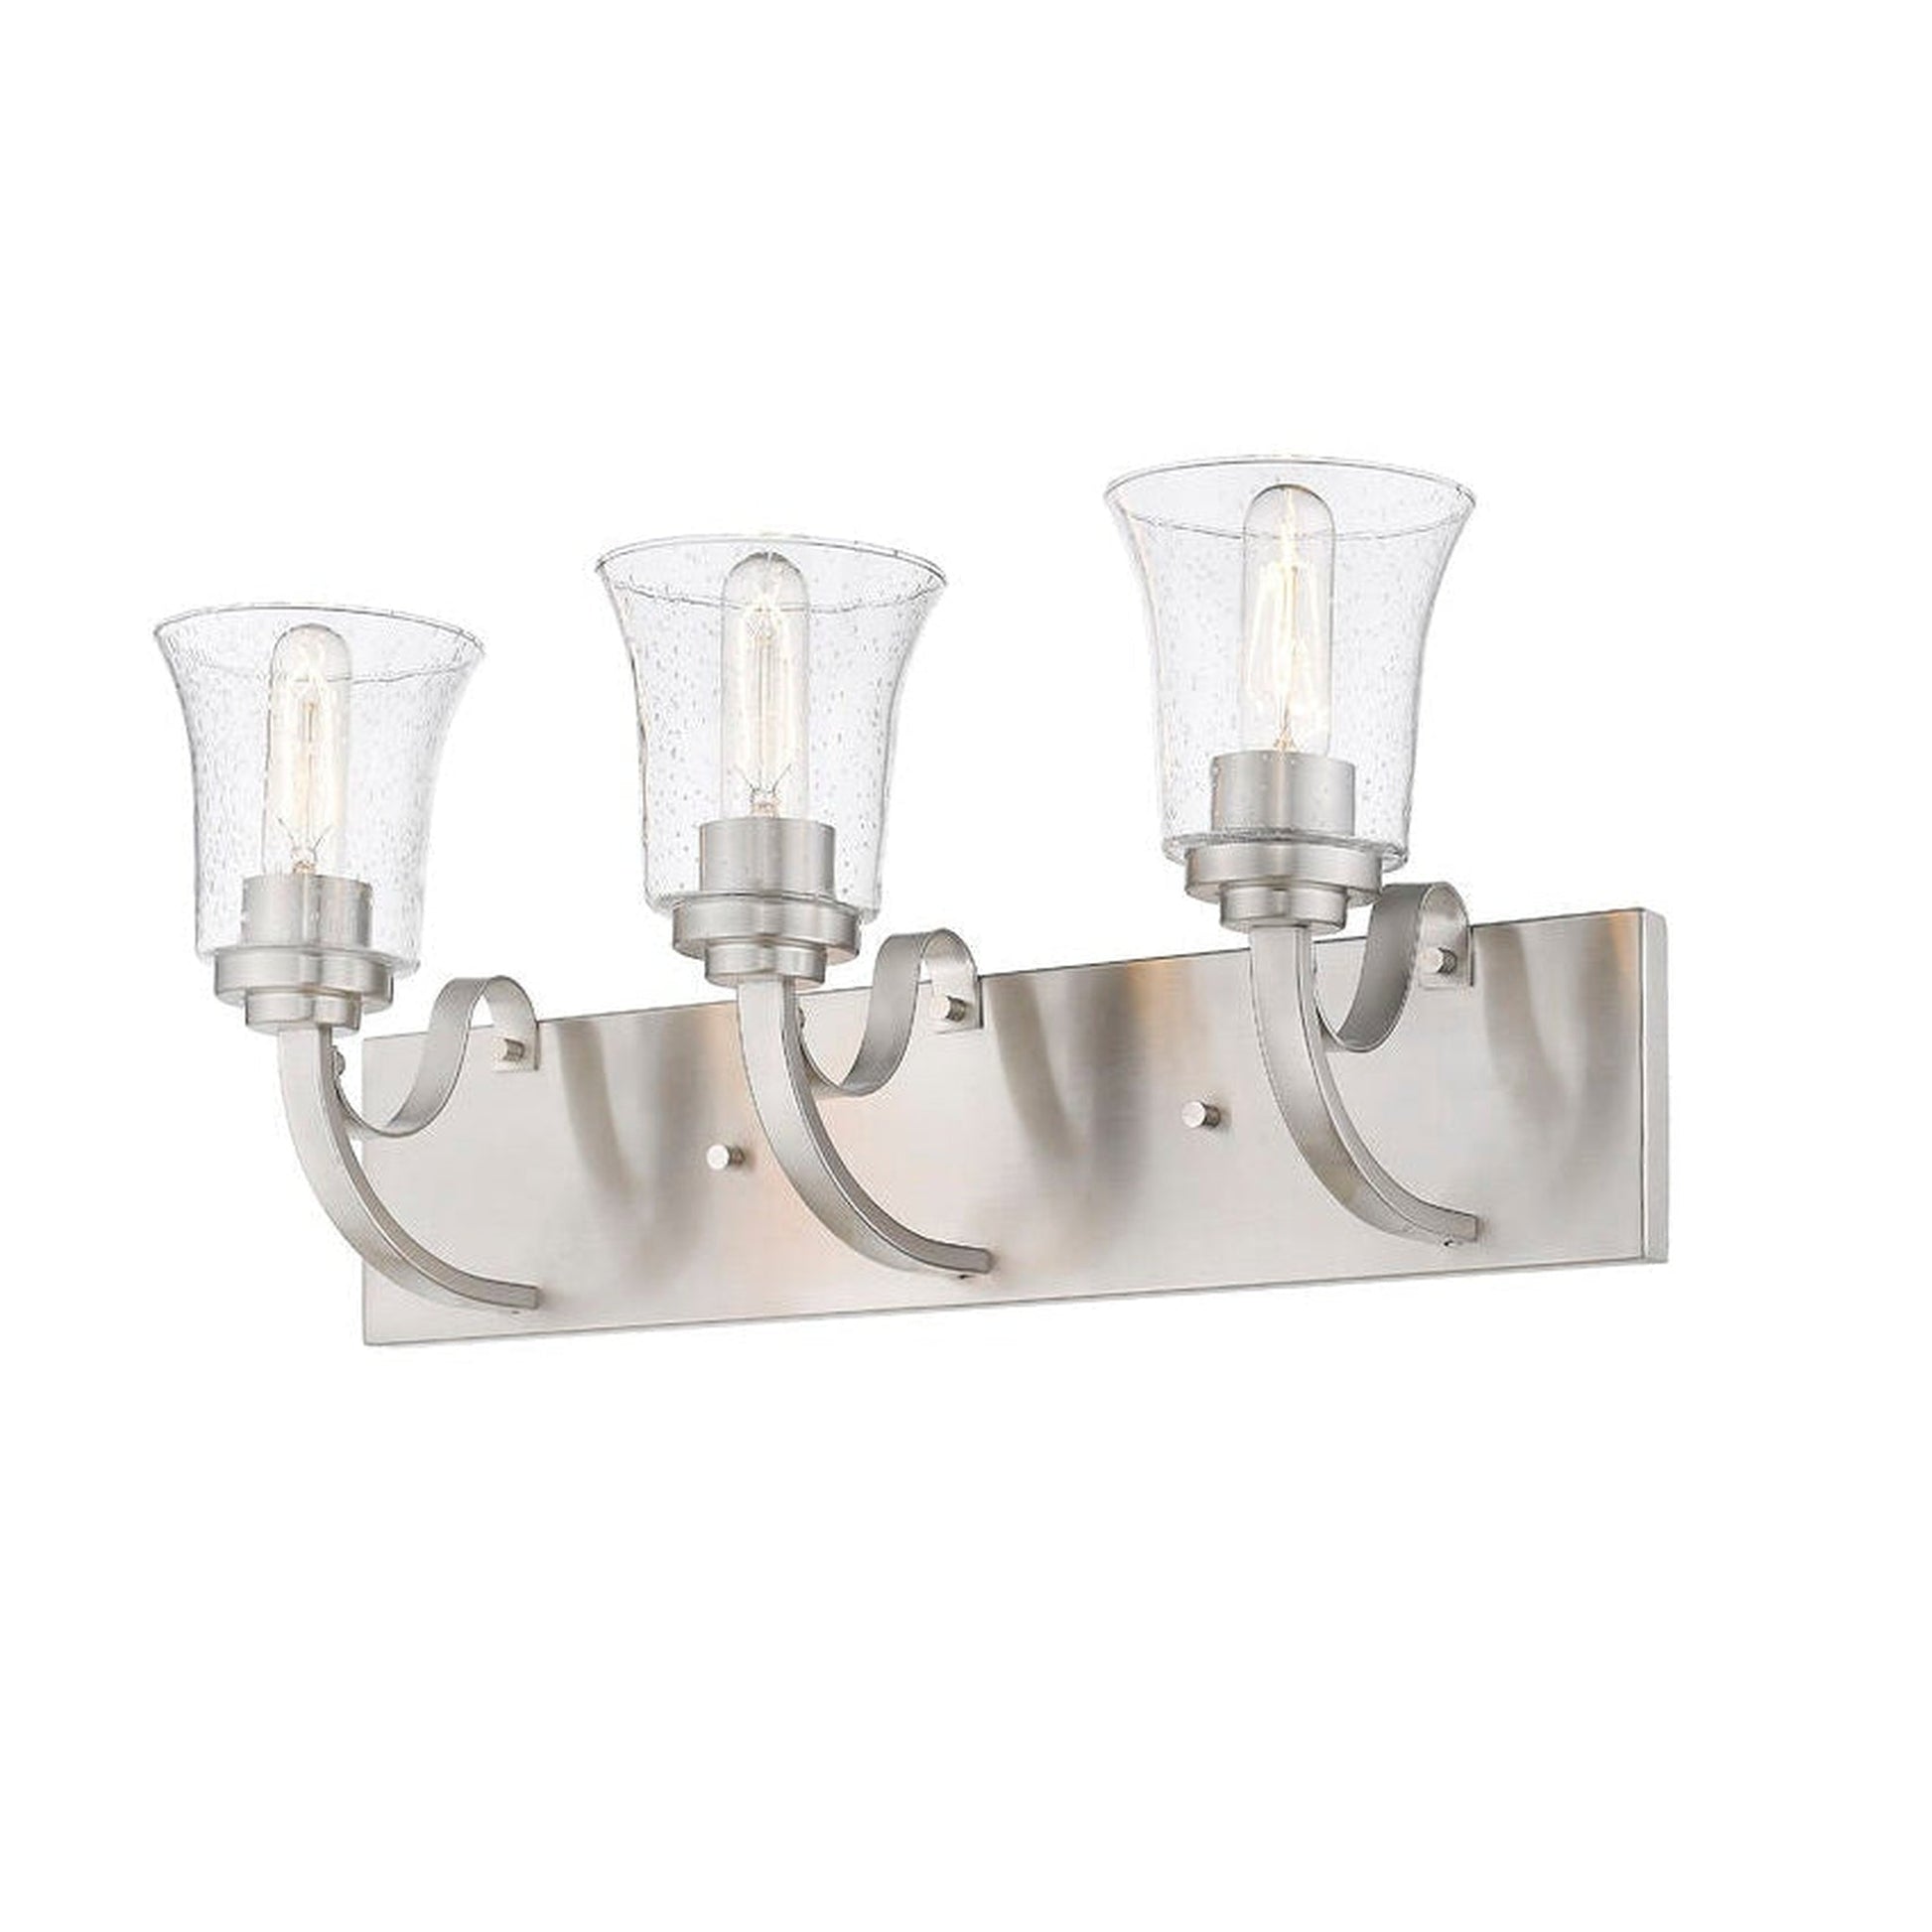 Z-Lite Halliwell 22" 3-Light Brushed Nickel Vanity Light With Clear Seedy Glass Shade